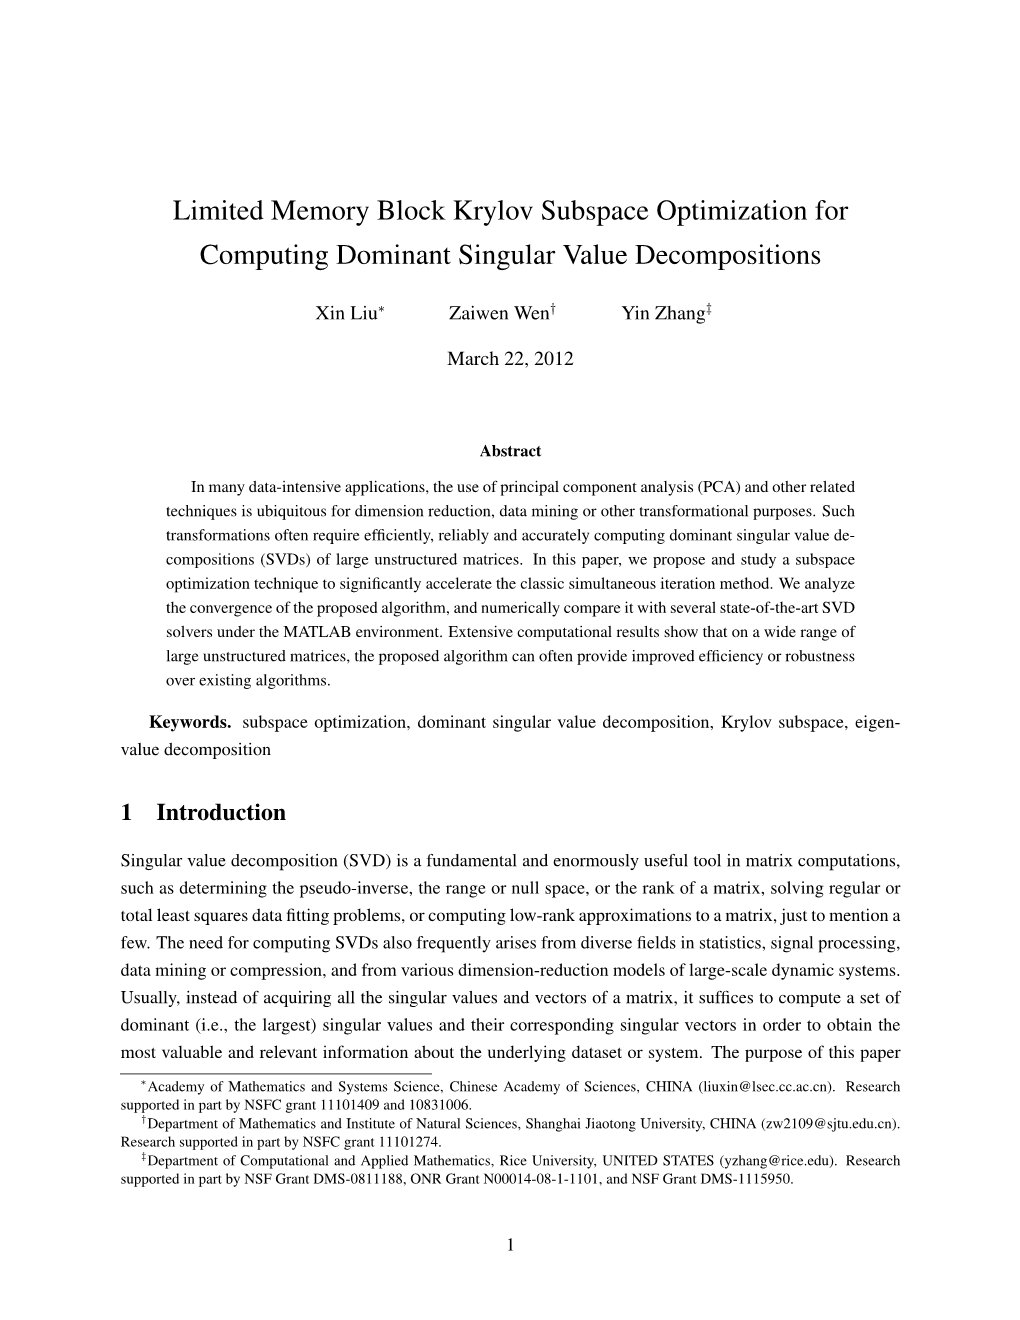 Limited Memory Block Krylov Subspace Optimization for Computing Dominant Singular Value Decompositions